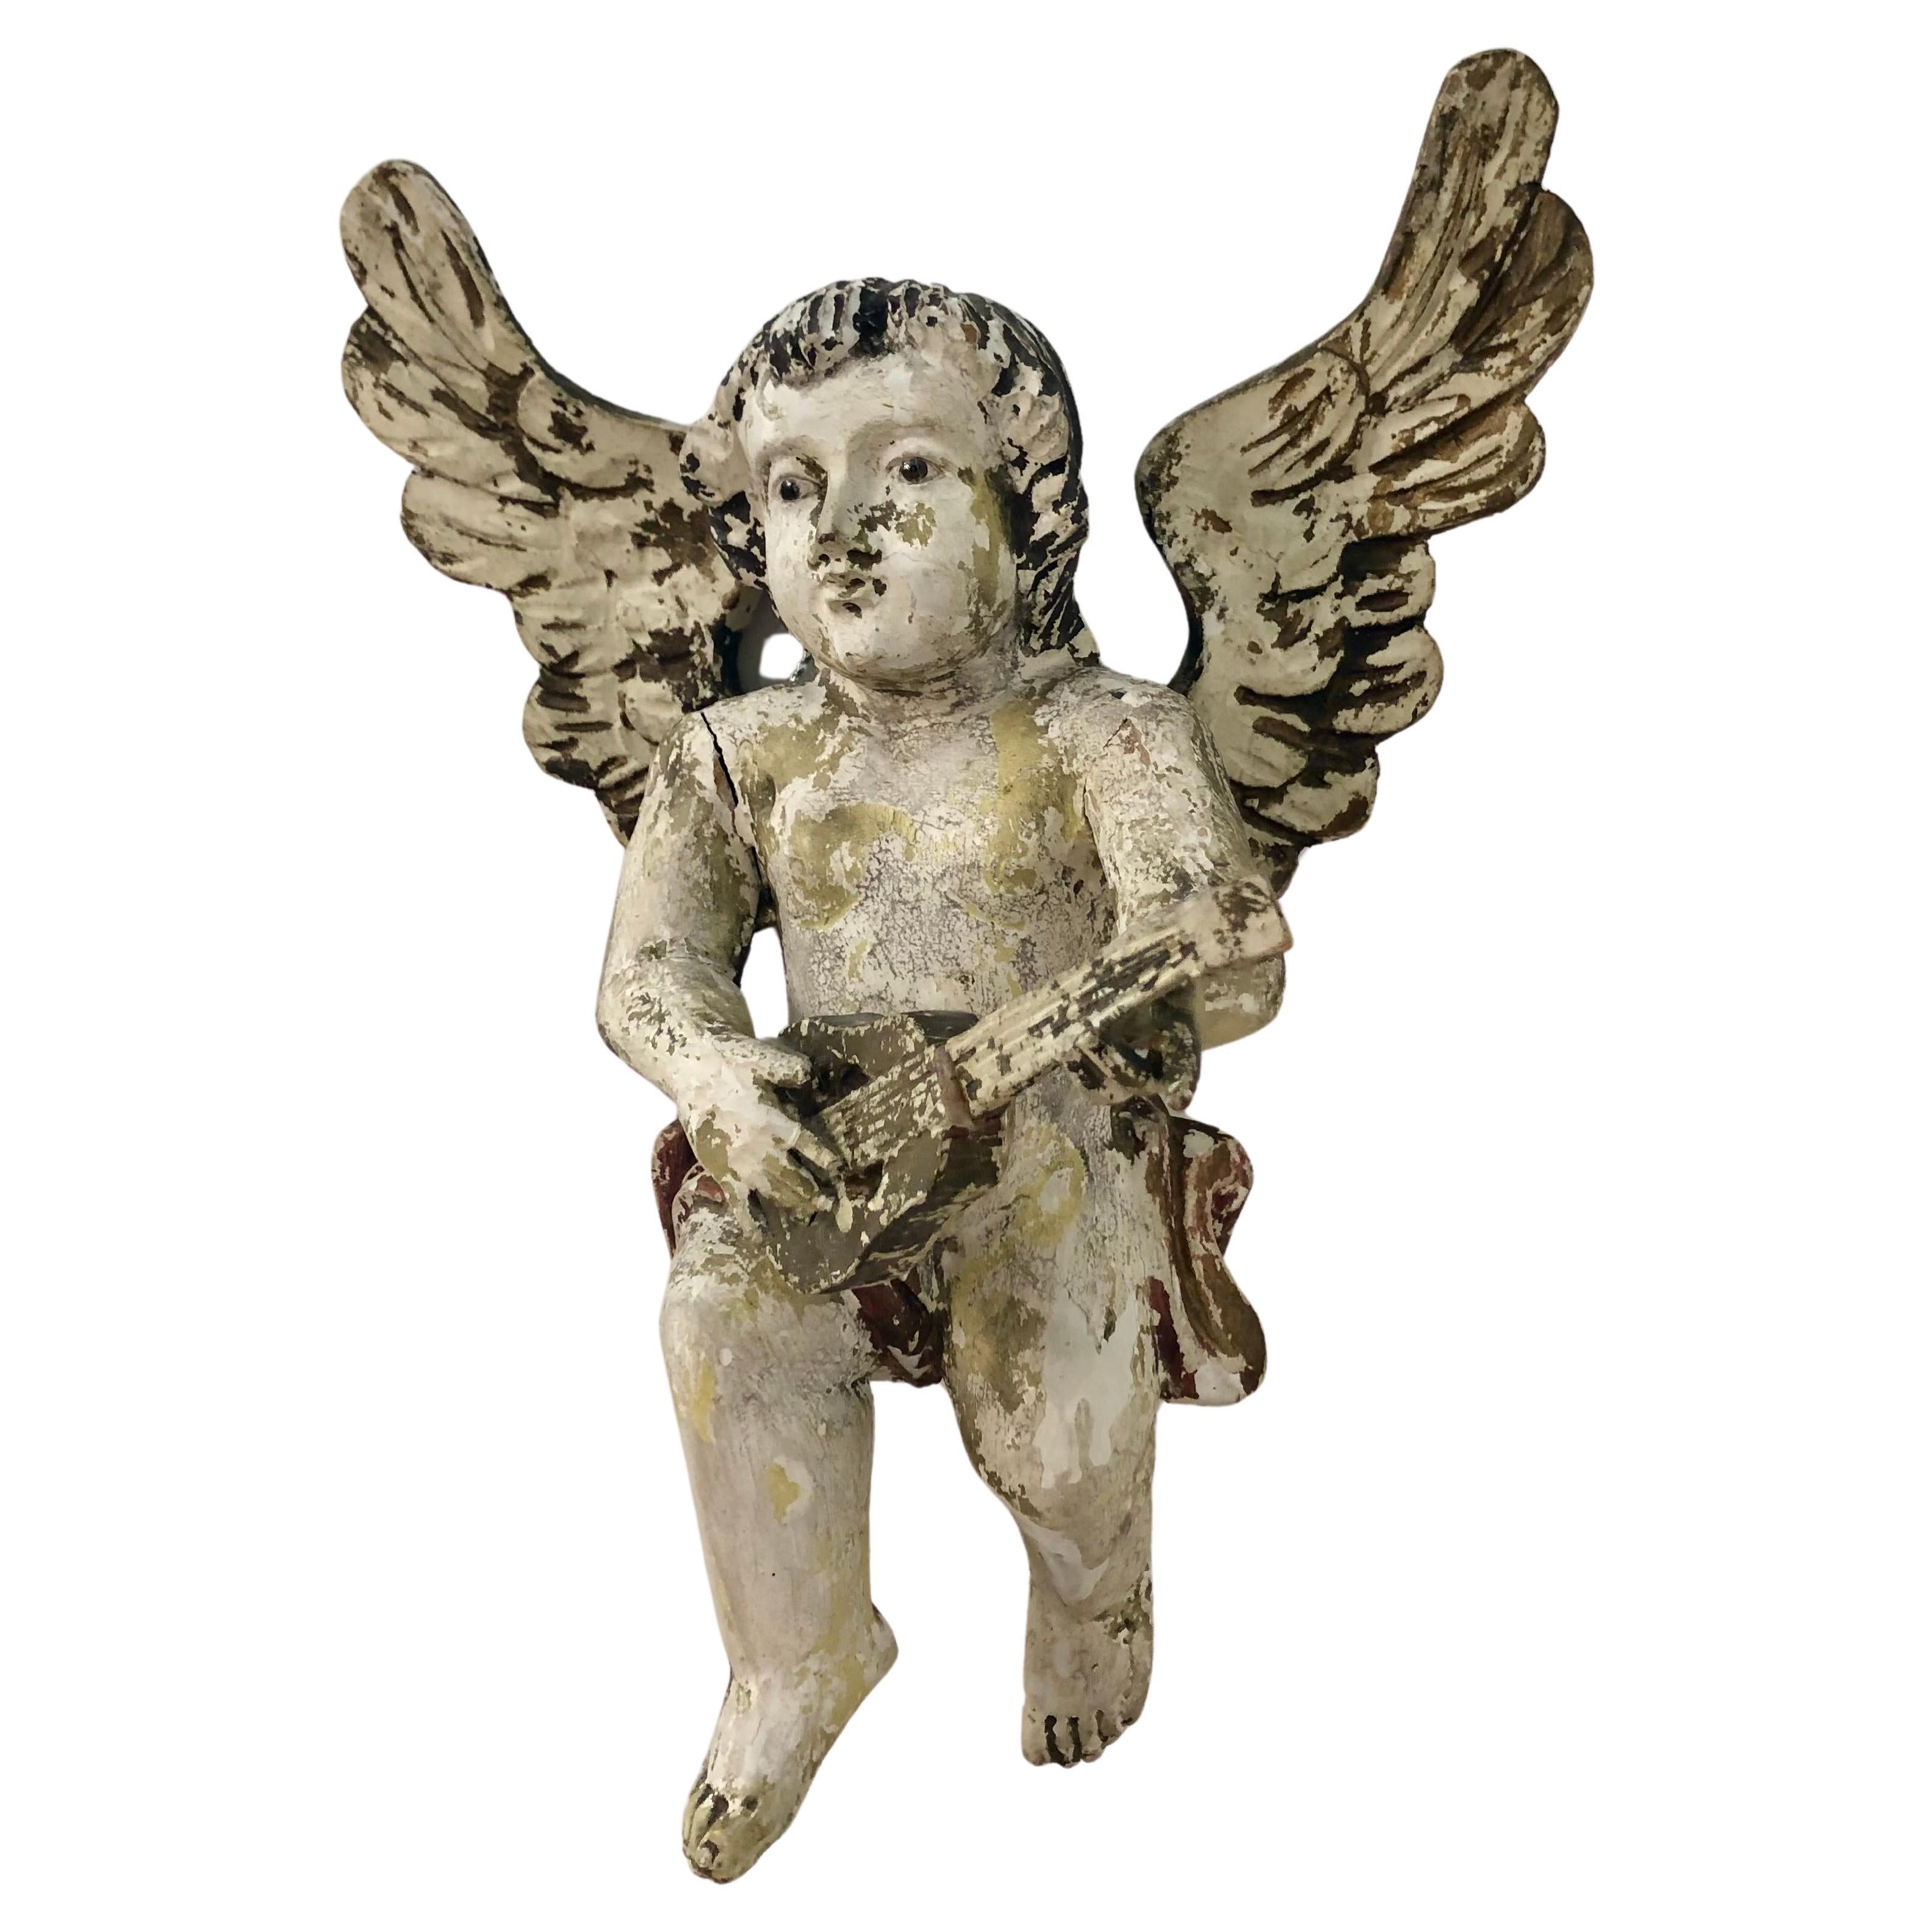 A beautiful early 19th Century polychrome winged cherubim, or angel, holding a guitar or mandolin. This angel would have most probably hung in a church.
The angel is carved and gessoed with white overpaint, gilding, and glass inset eyes.
Most